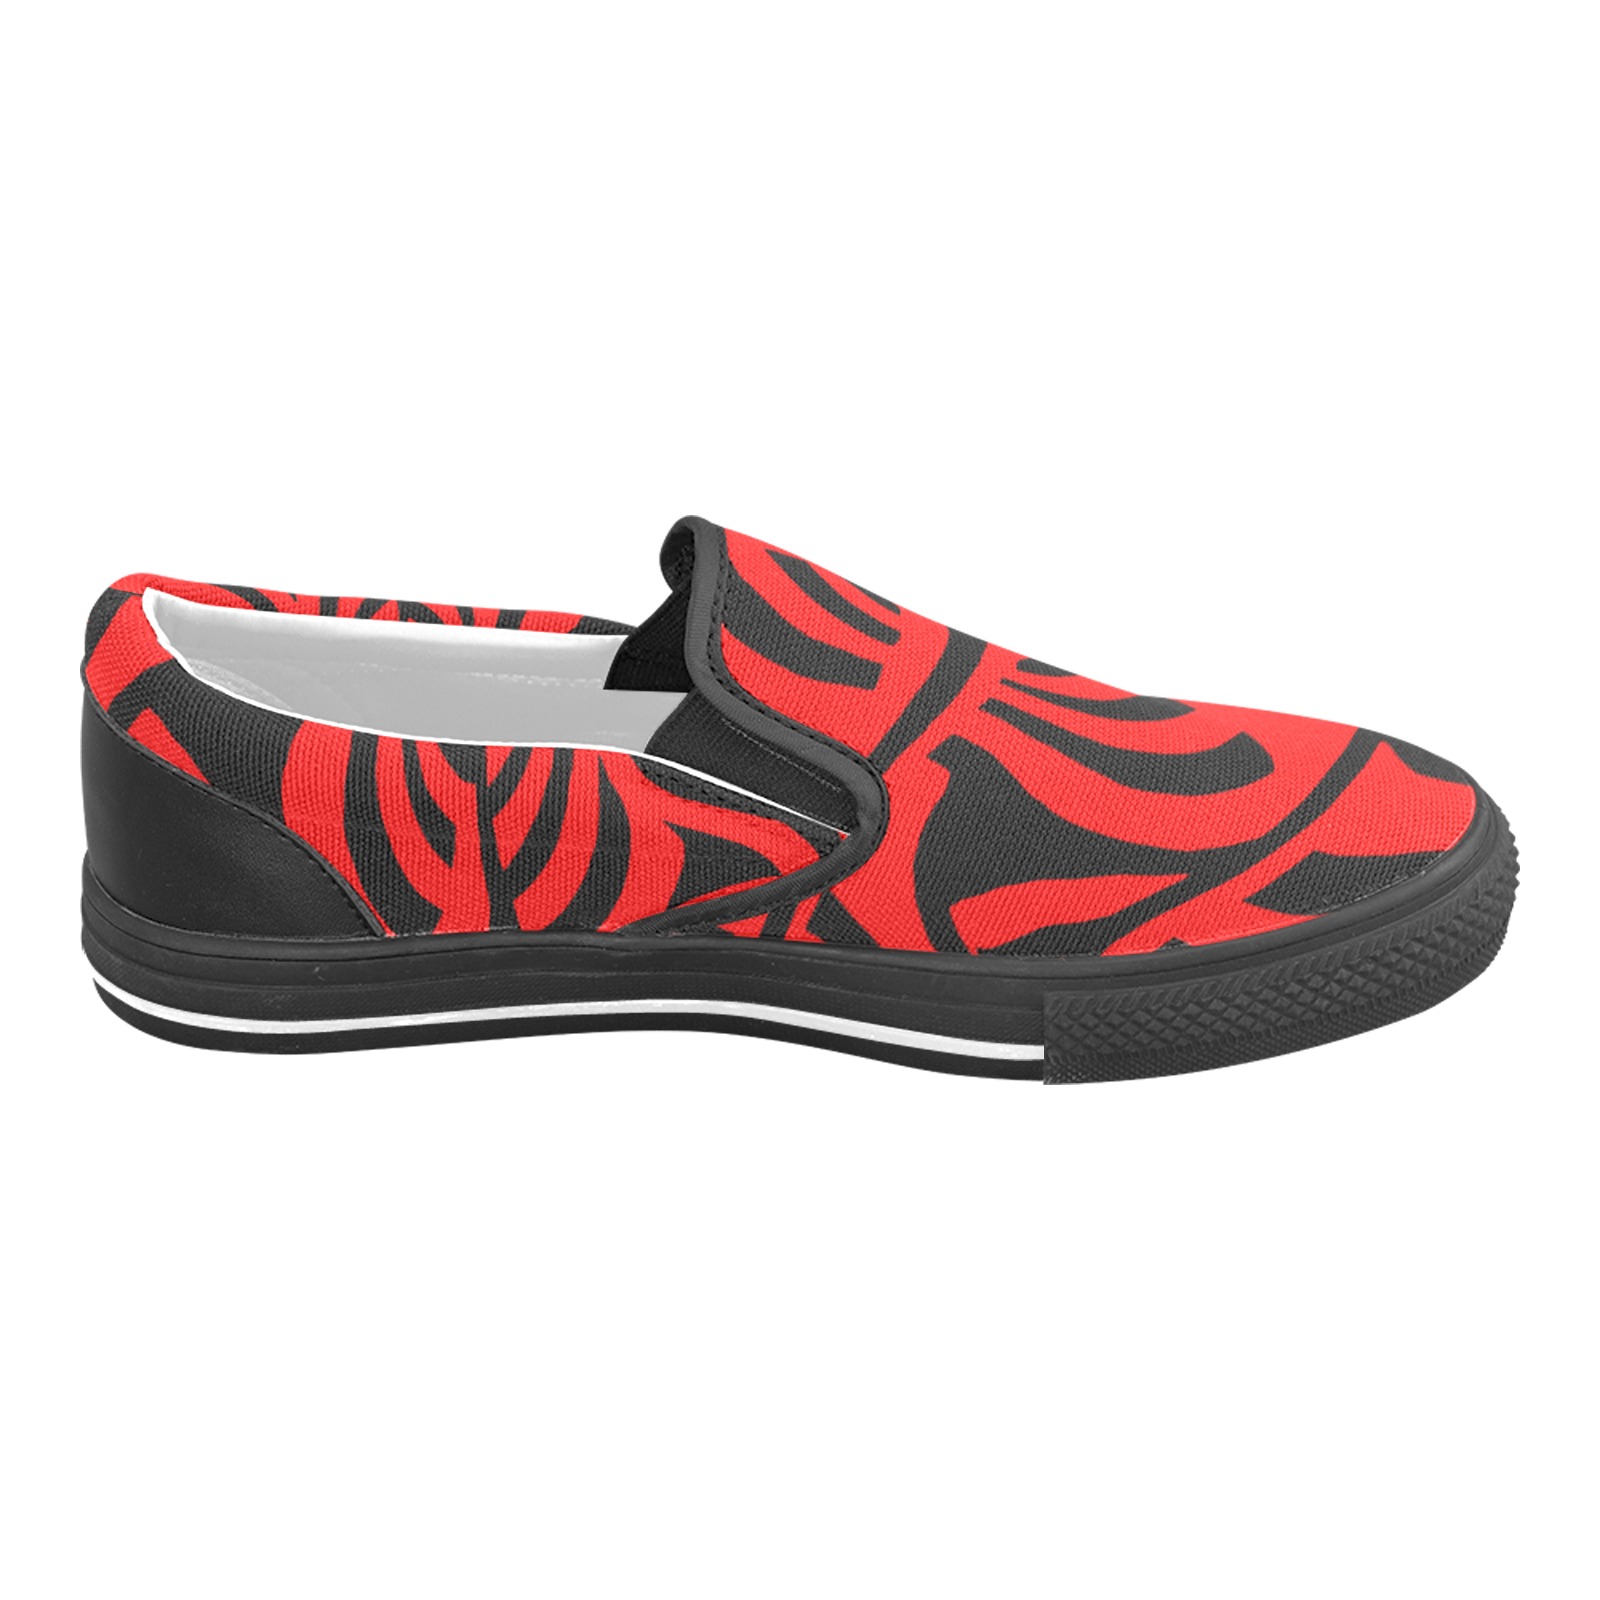 aaa red Men's Unusual Slip-on Canvas Shoes (Model 019)